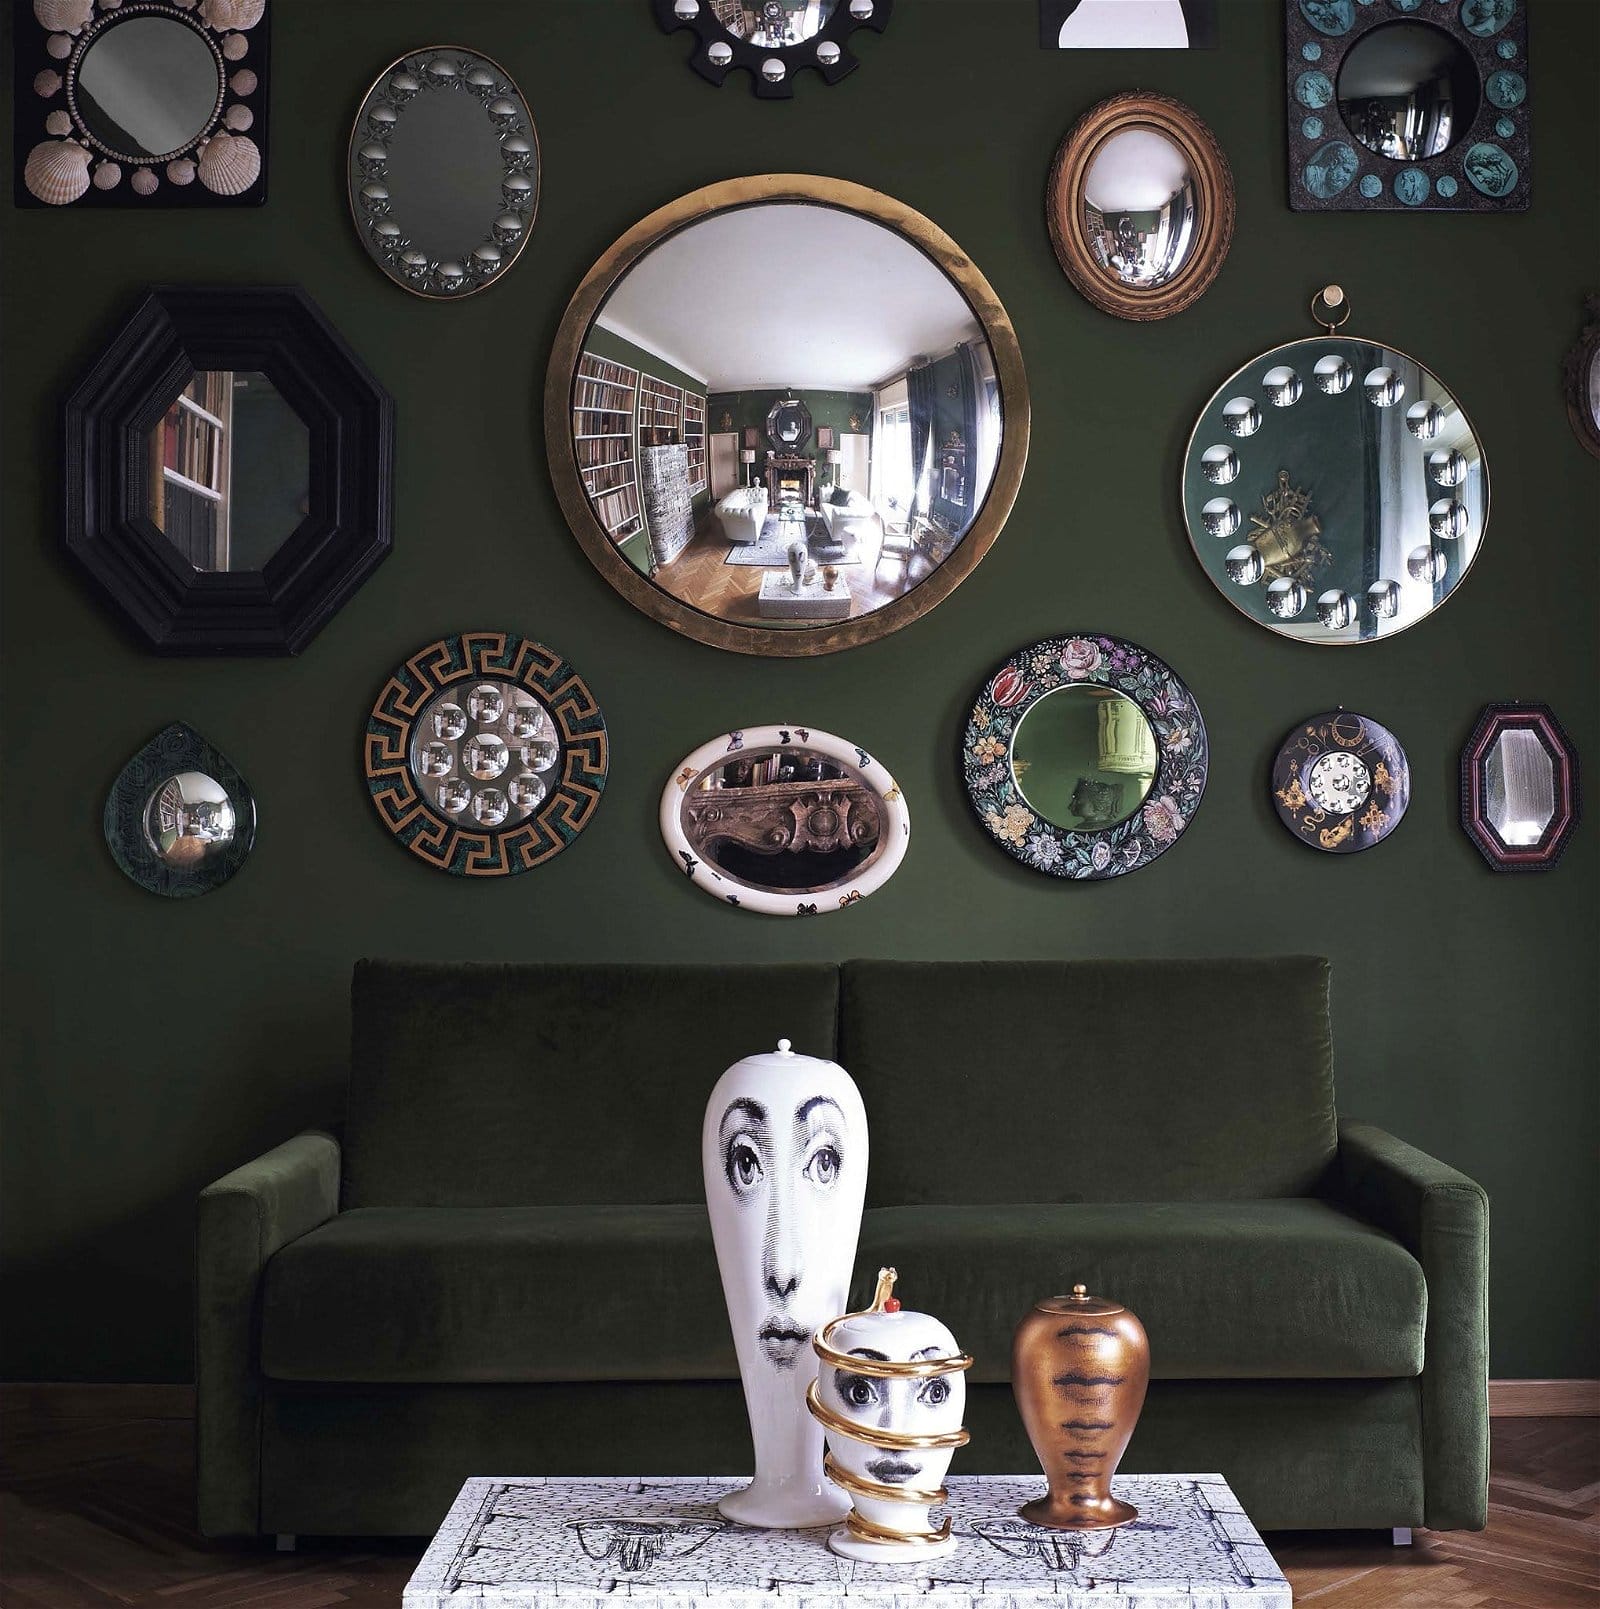 Of Course the Fornasetti Home Is Just as Surreal and Whimsical as You’d Expect